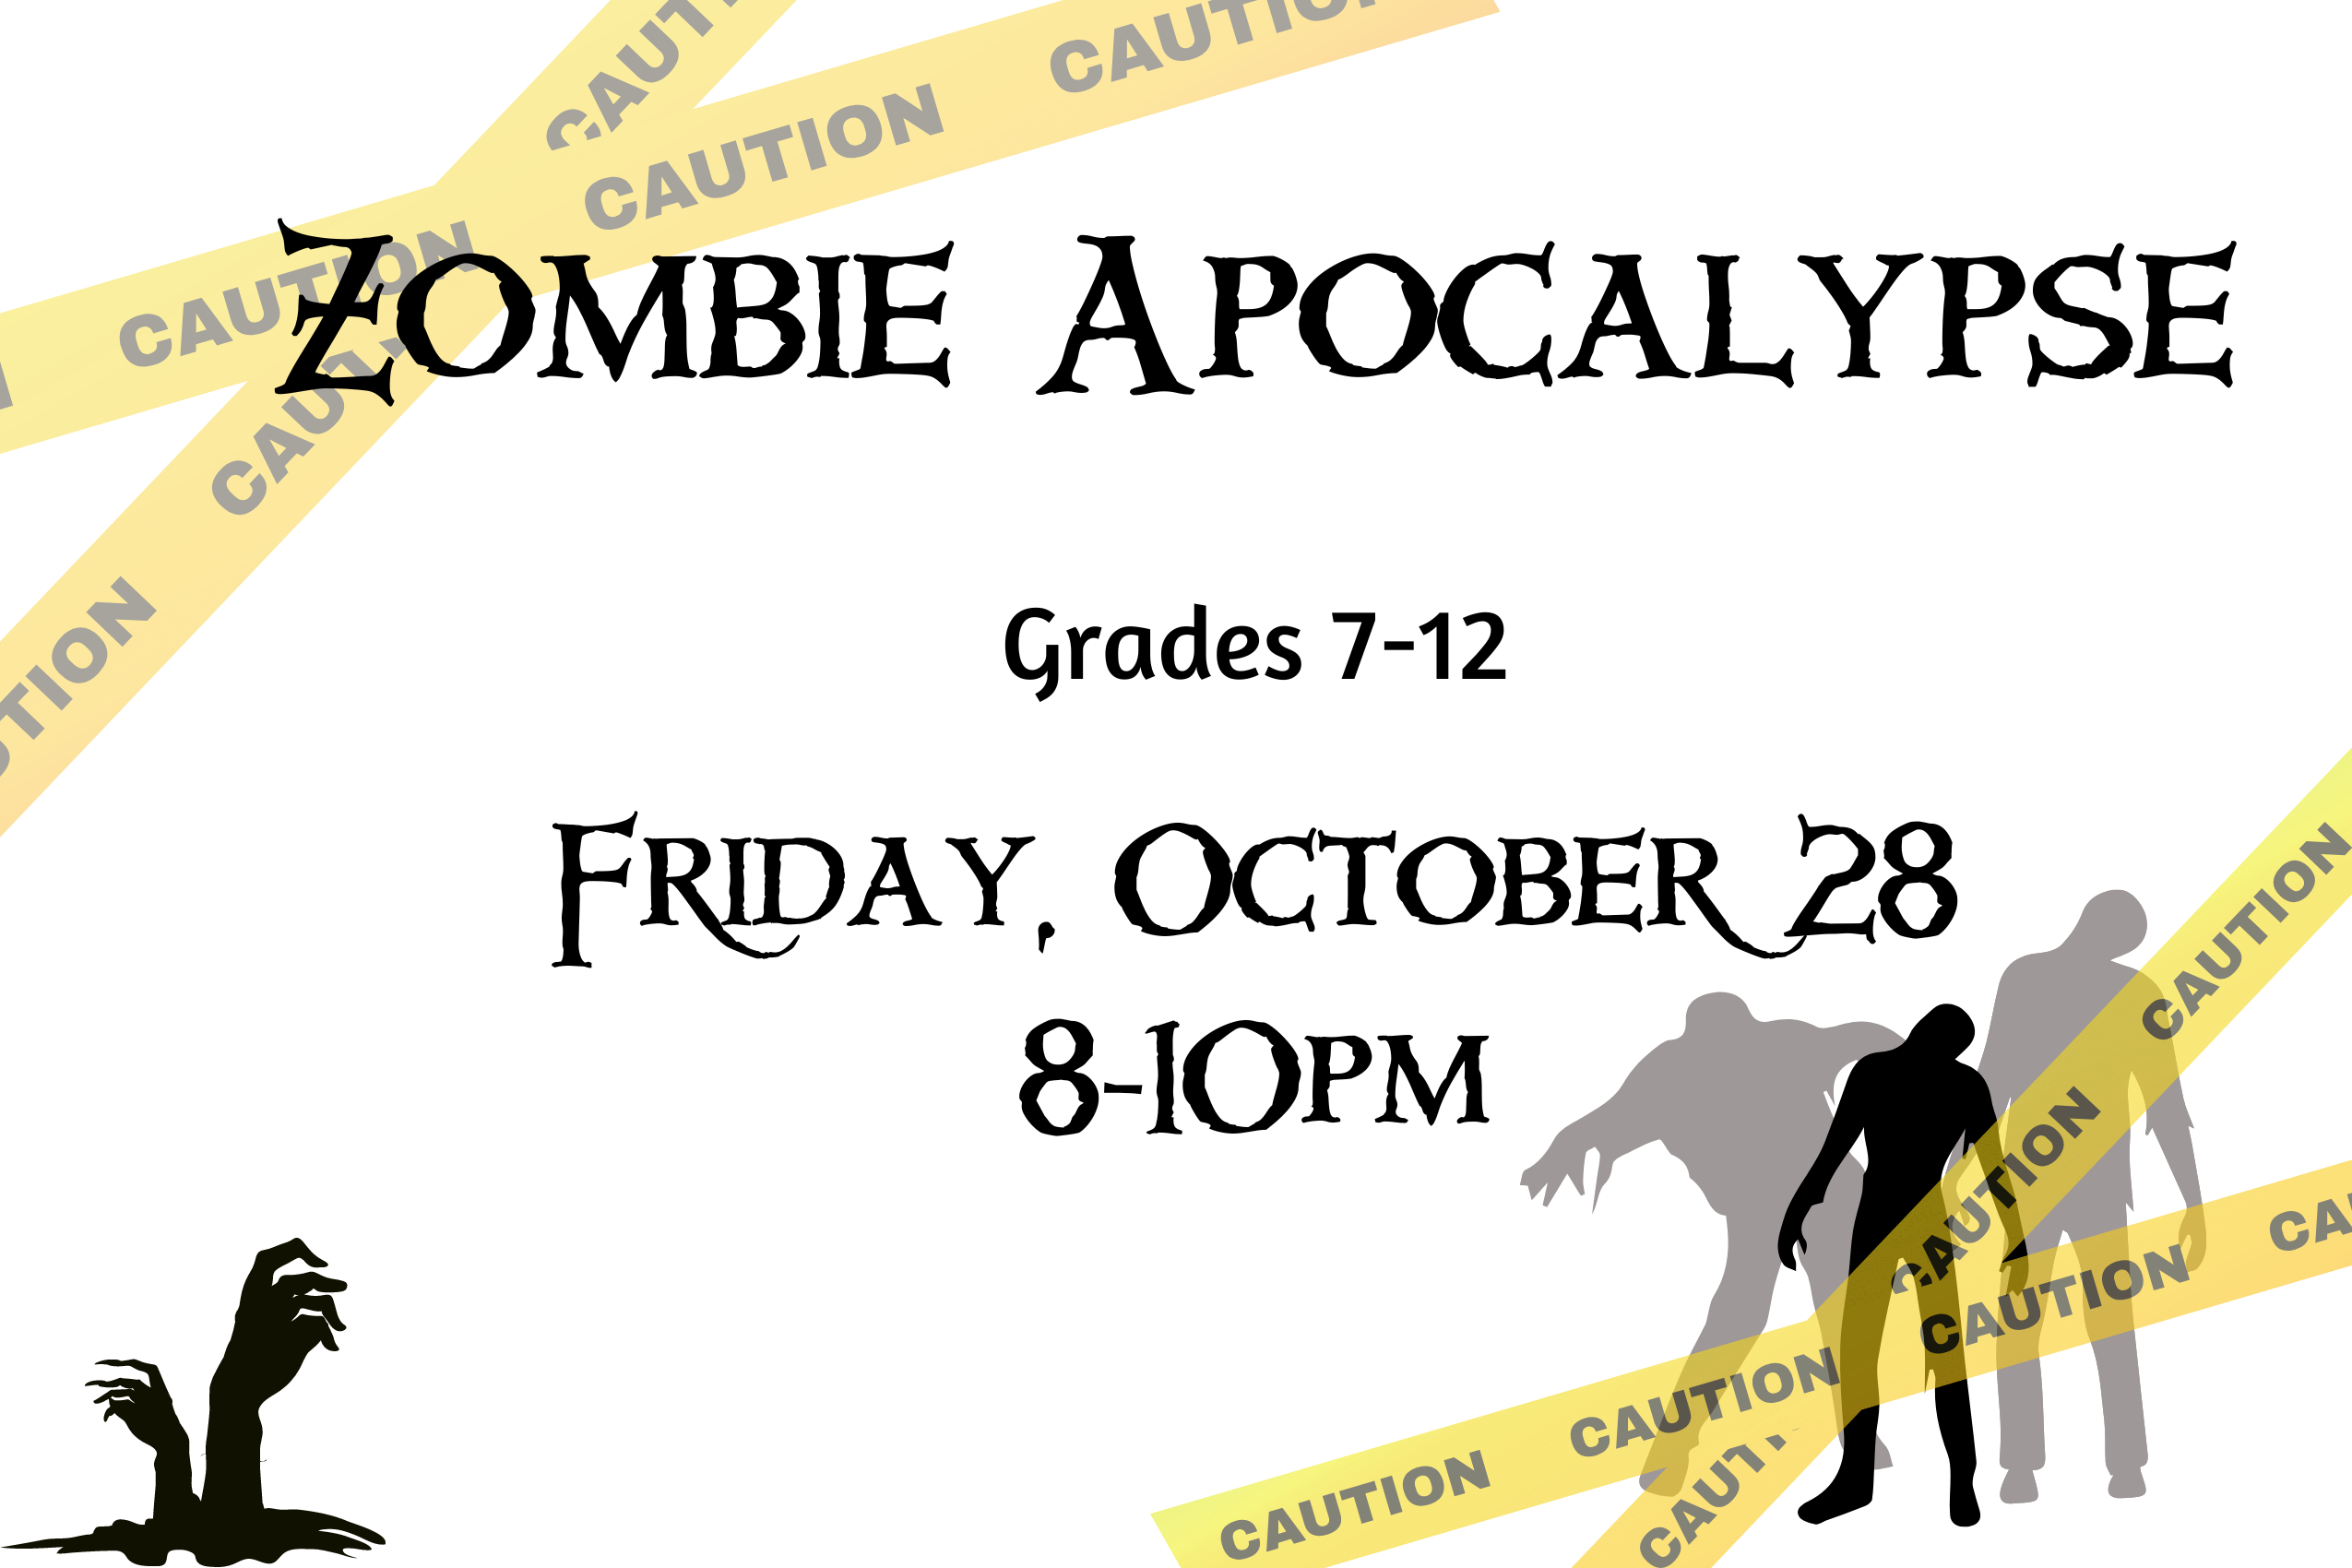 Program flyer with the following text, "Zombie Apocalypse. Grades 7-12. Friday, October 28. 8:00-10:00pm."